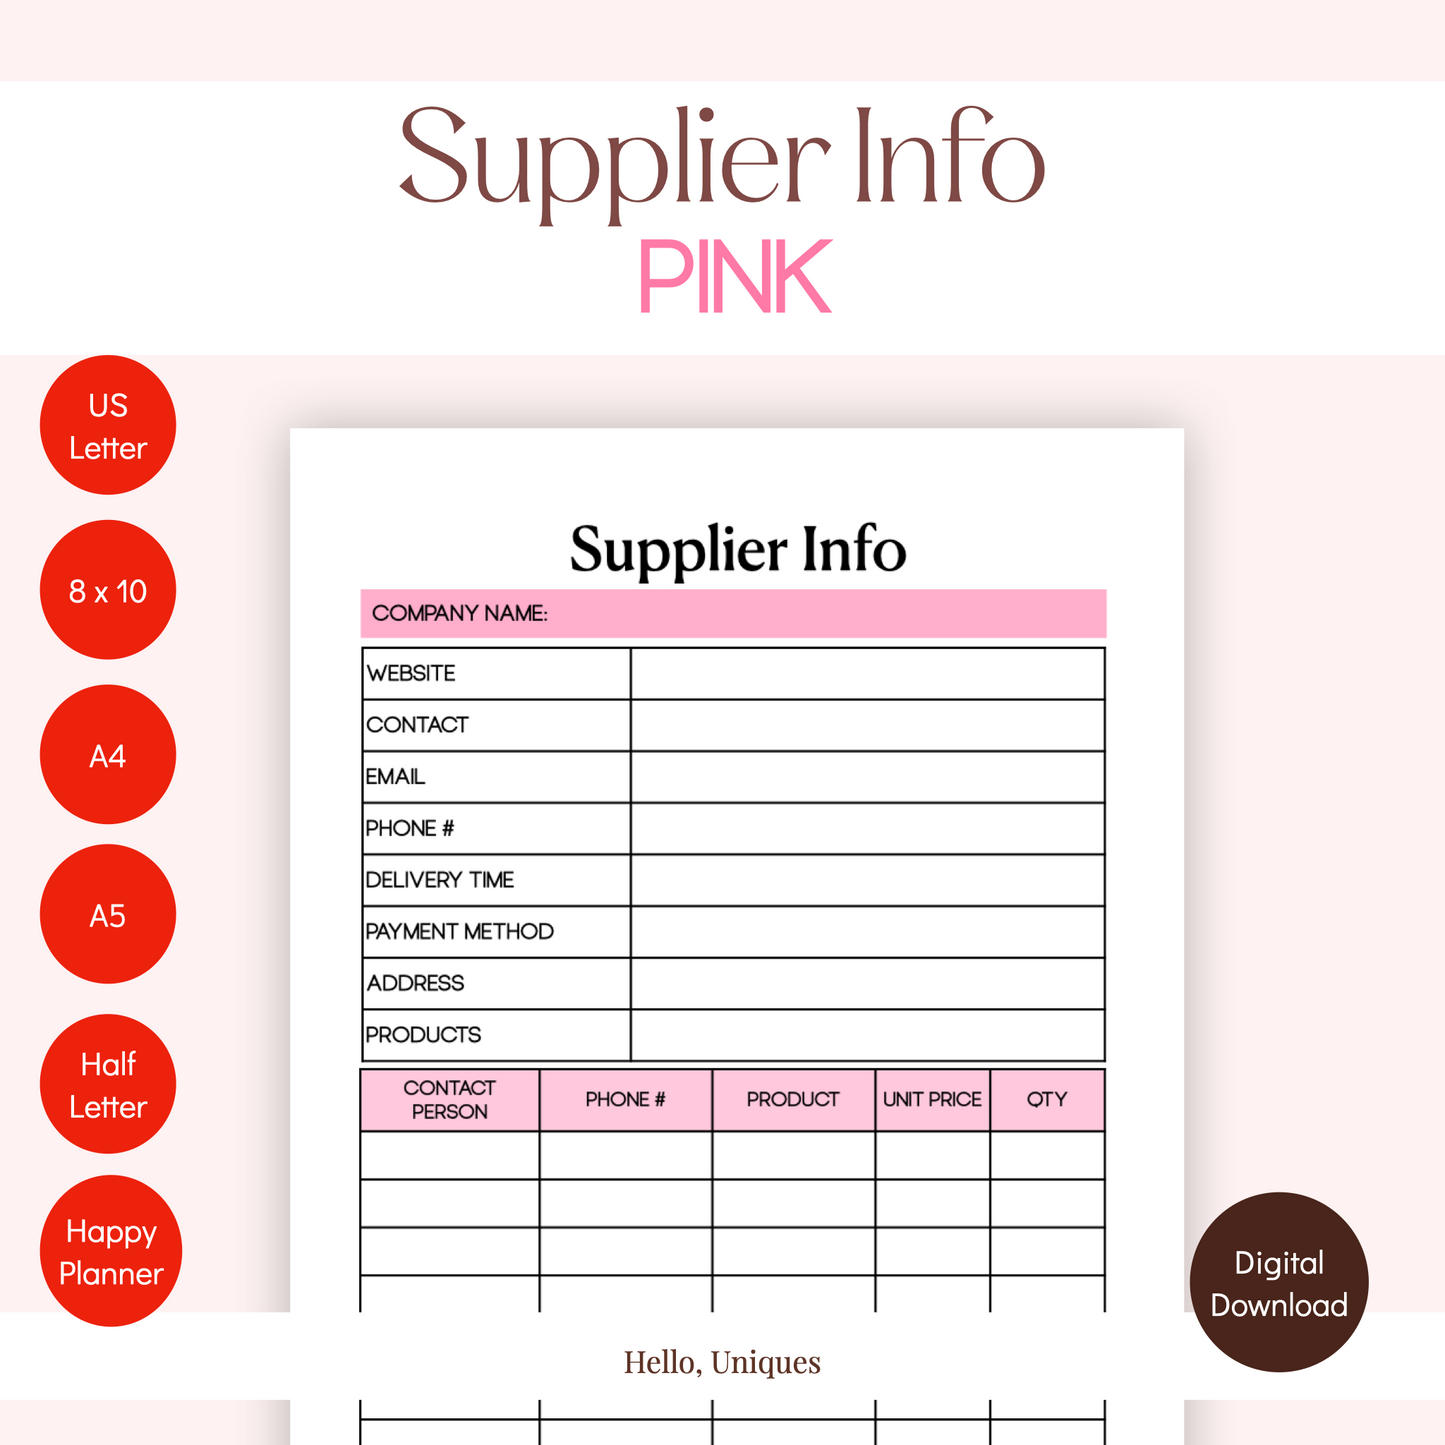 Supplier Info 1.0 - Pink - Premium Printable from Hello, Uniques Planner - Shop now at Hello, Uniques Planner